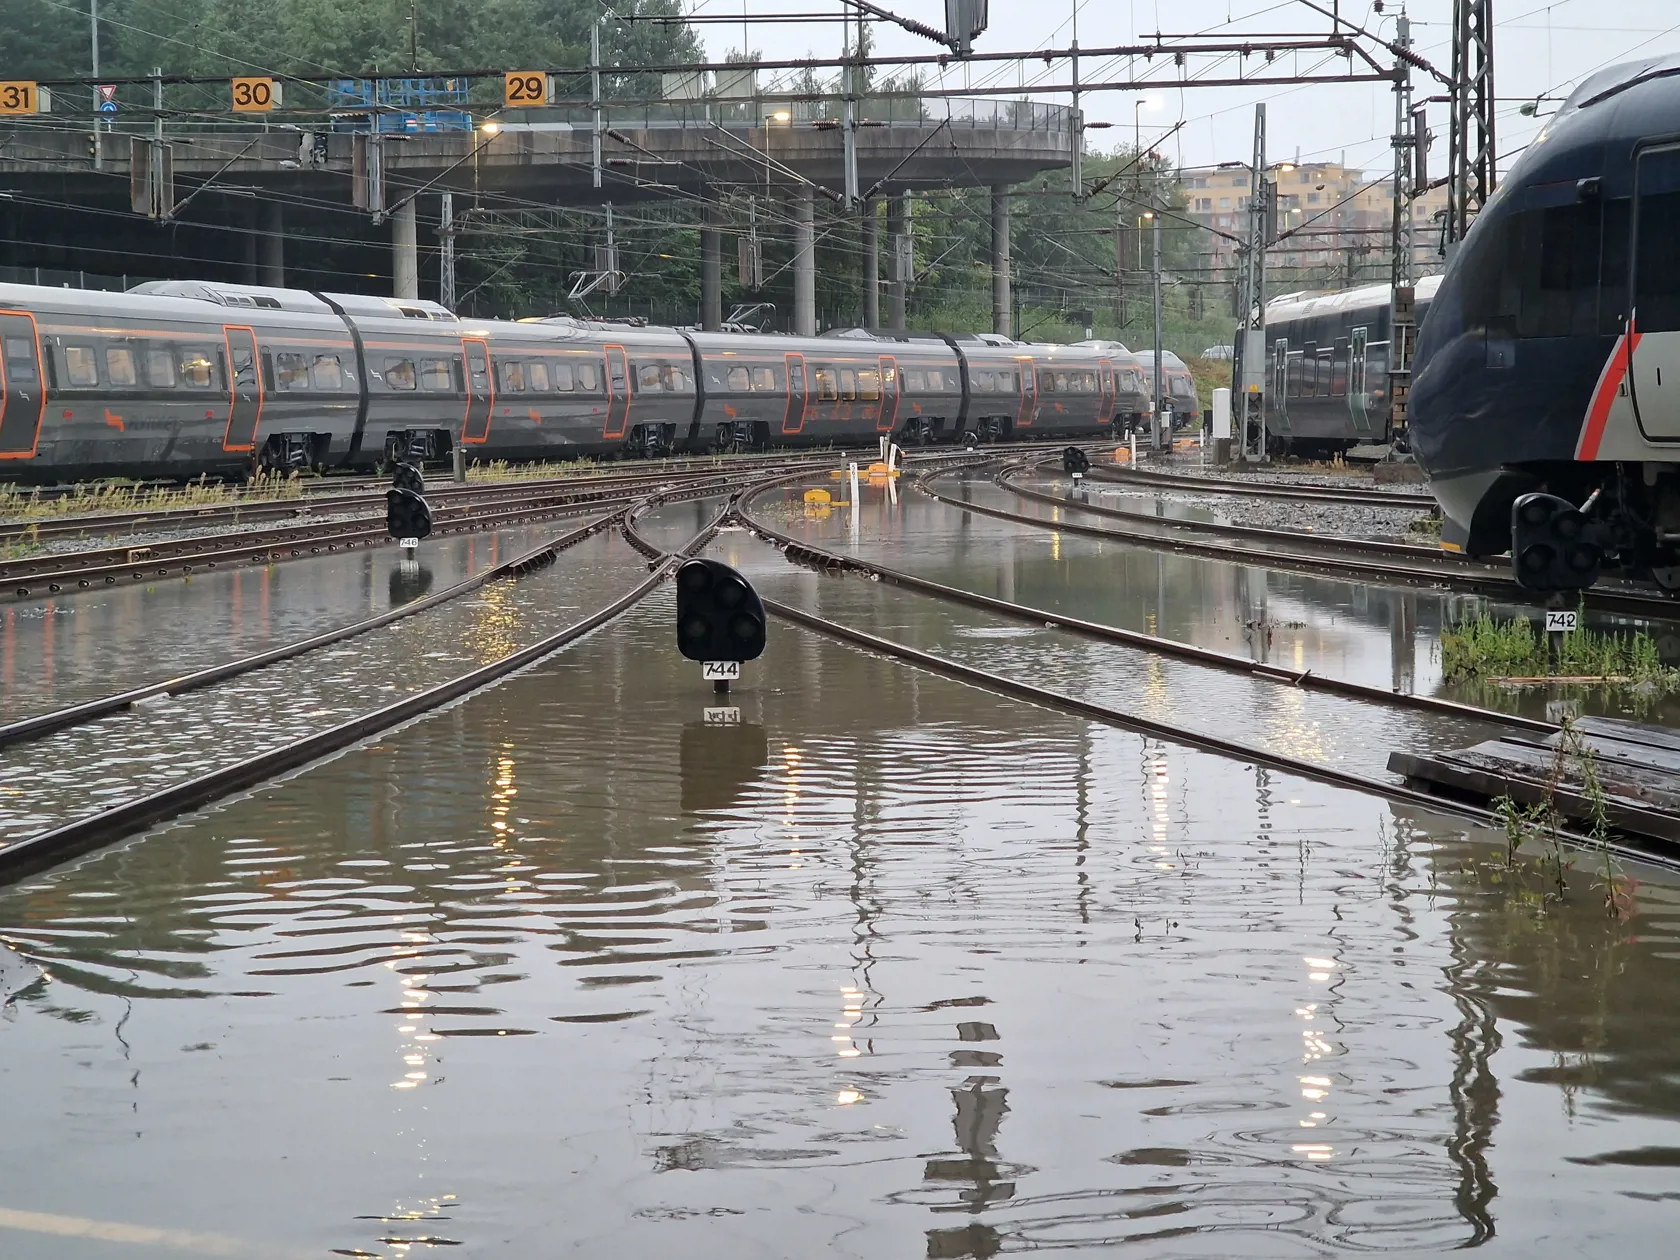 Flooded parking facility for trains in Norway after heavy rain in the night of August 27